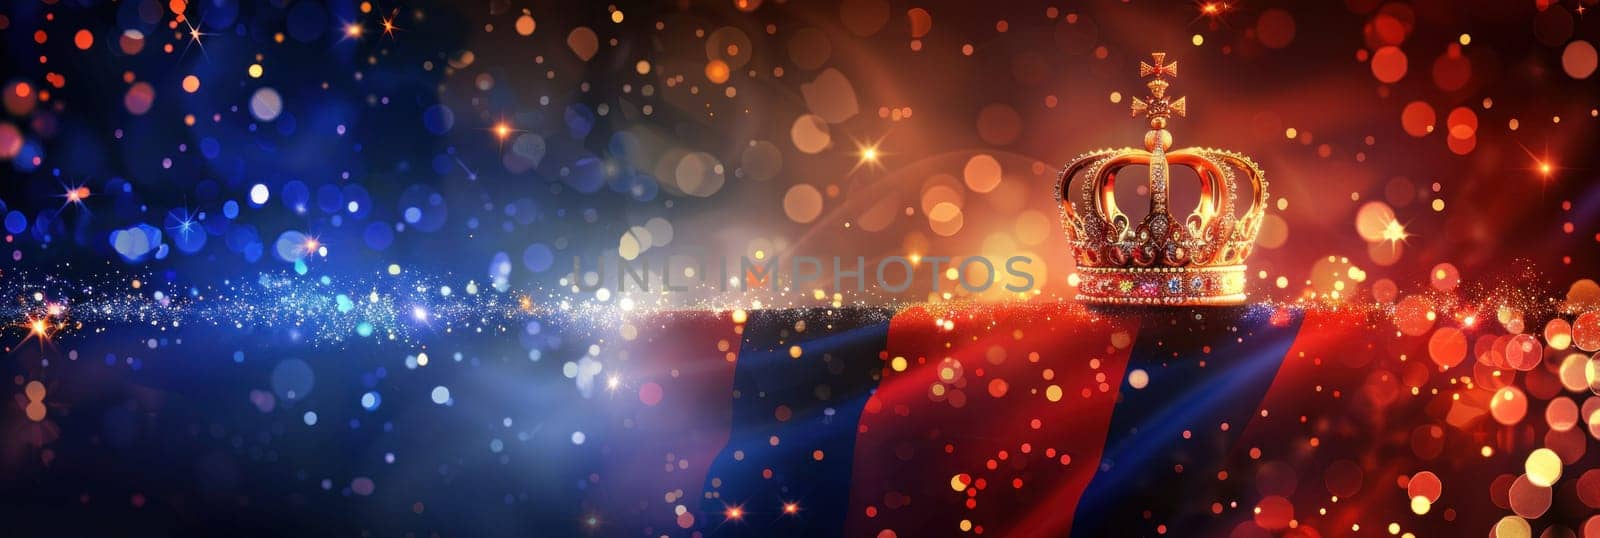 Royal crown sparkling on red, blue, and gold background with glistening lights, sparkles majestic luxury and elegance concept image